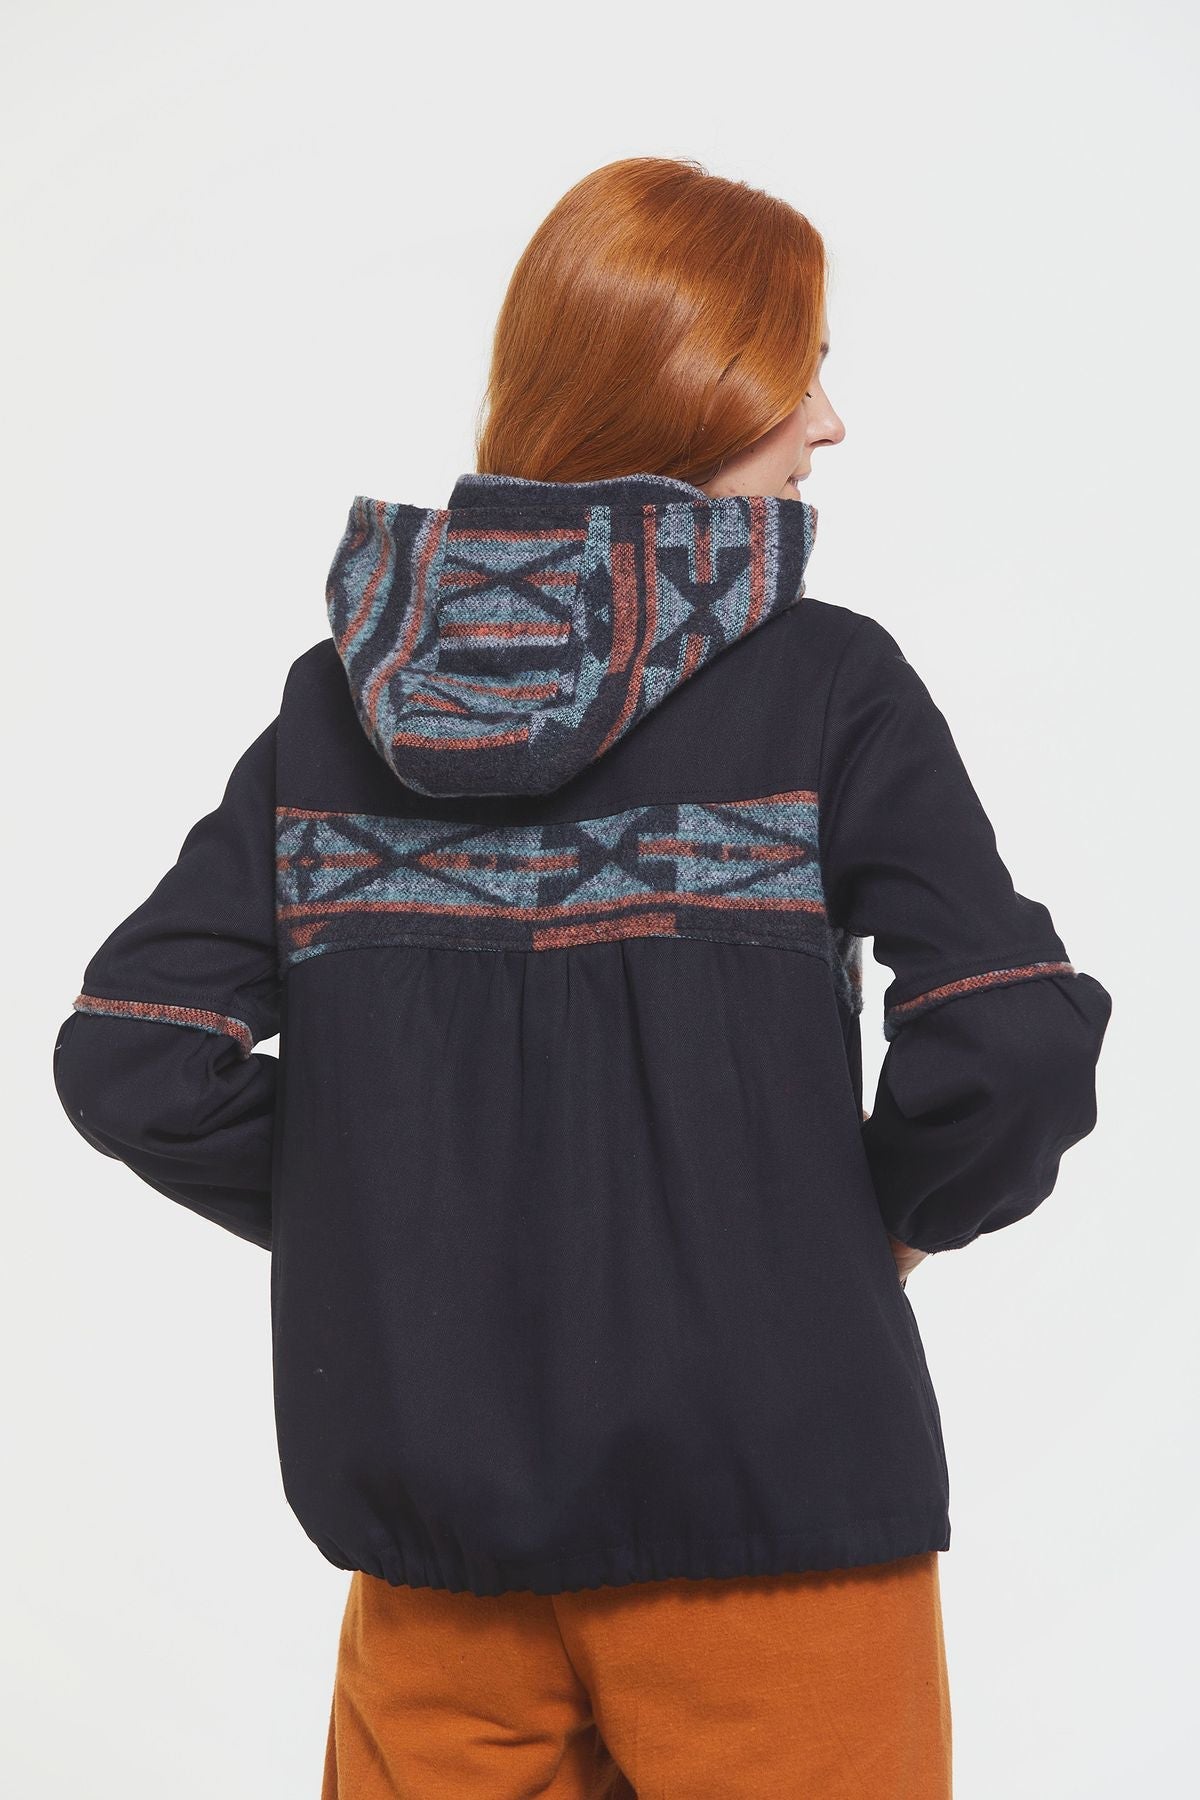 Women's Coat with Hood and Ethnic Pattern Black